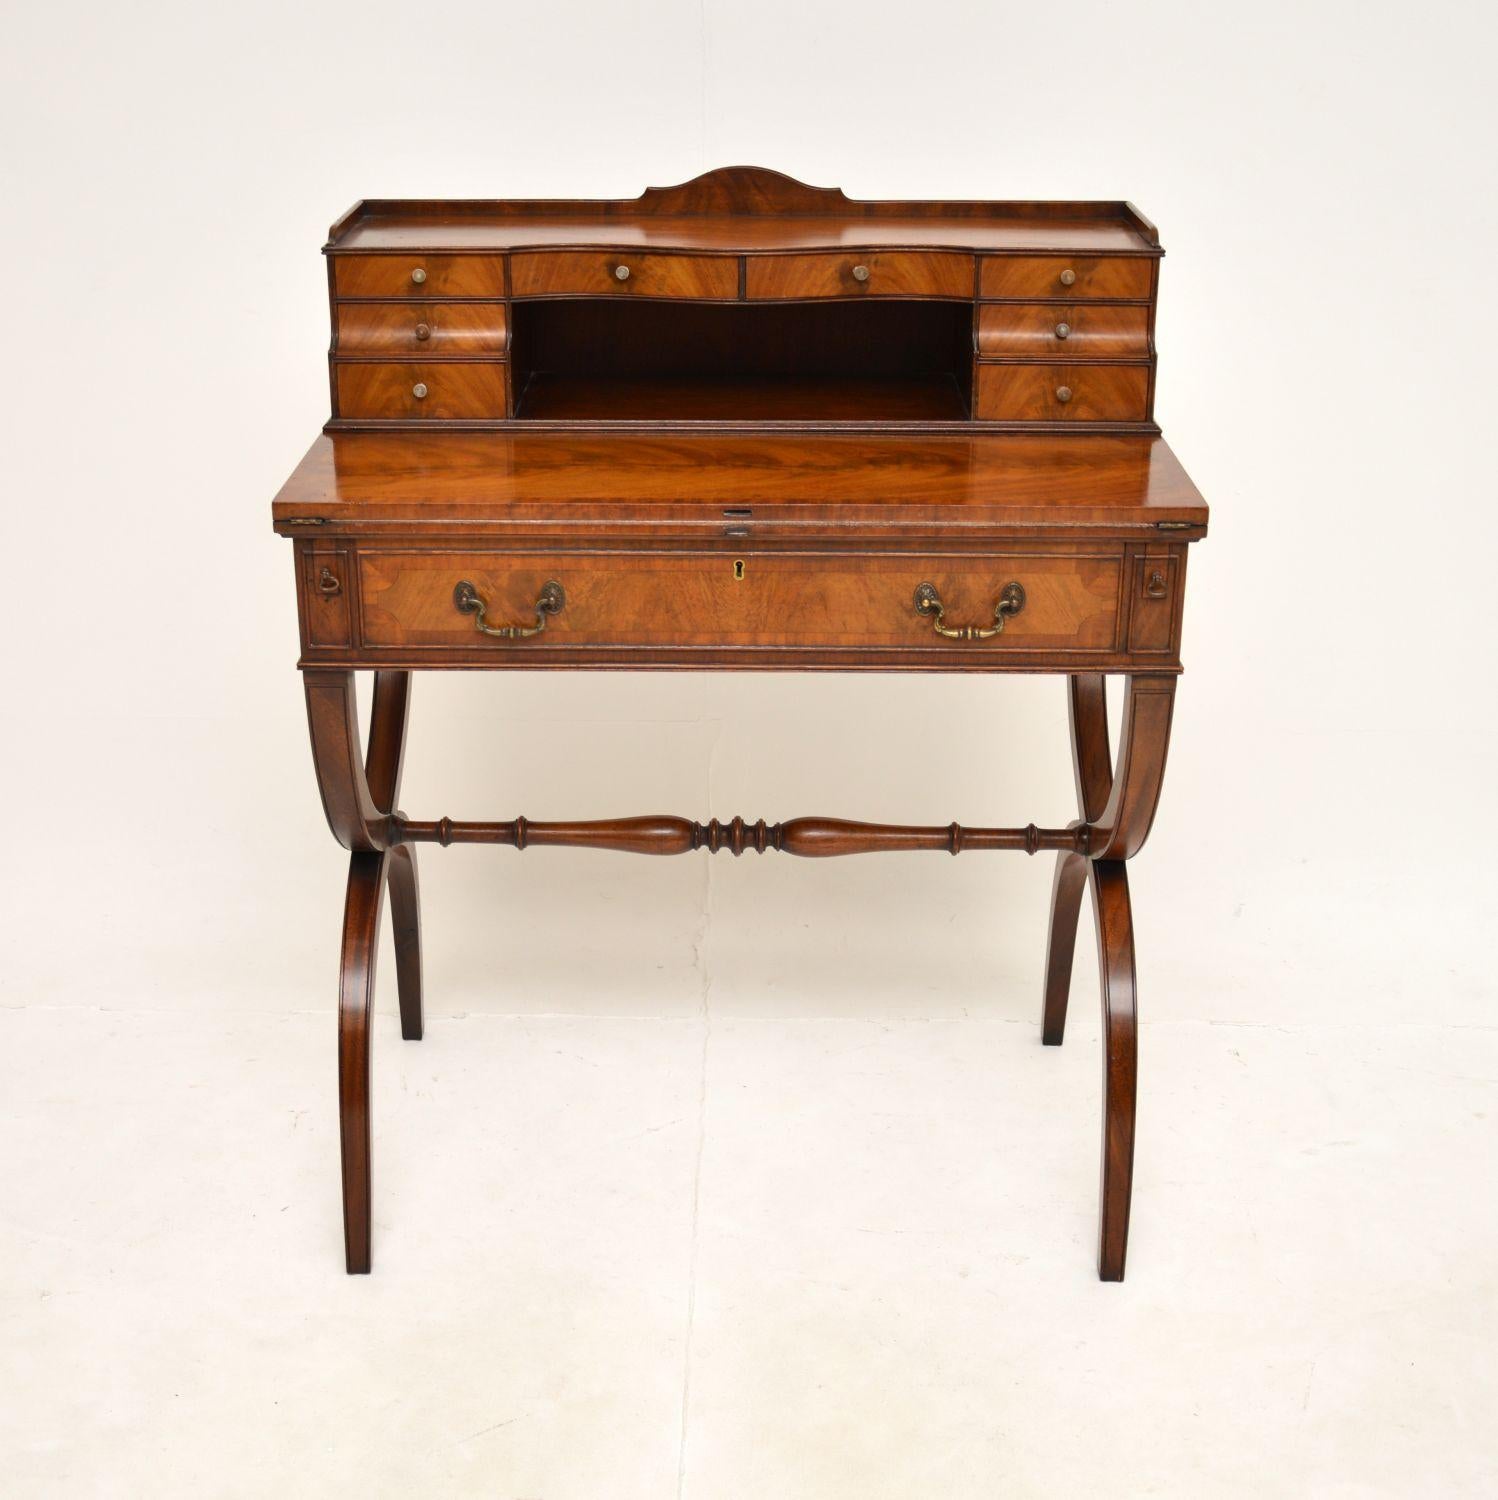 A wonderful antique Sheraton style escritoire desk. This was made in England, it dates from around 1900-1910.

The quality is outstanding, this is very well made and beautifully designed. It sits on a X frames with a nicely turned stretcher for